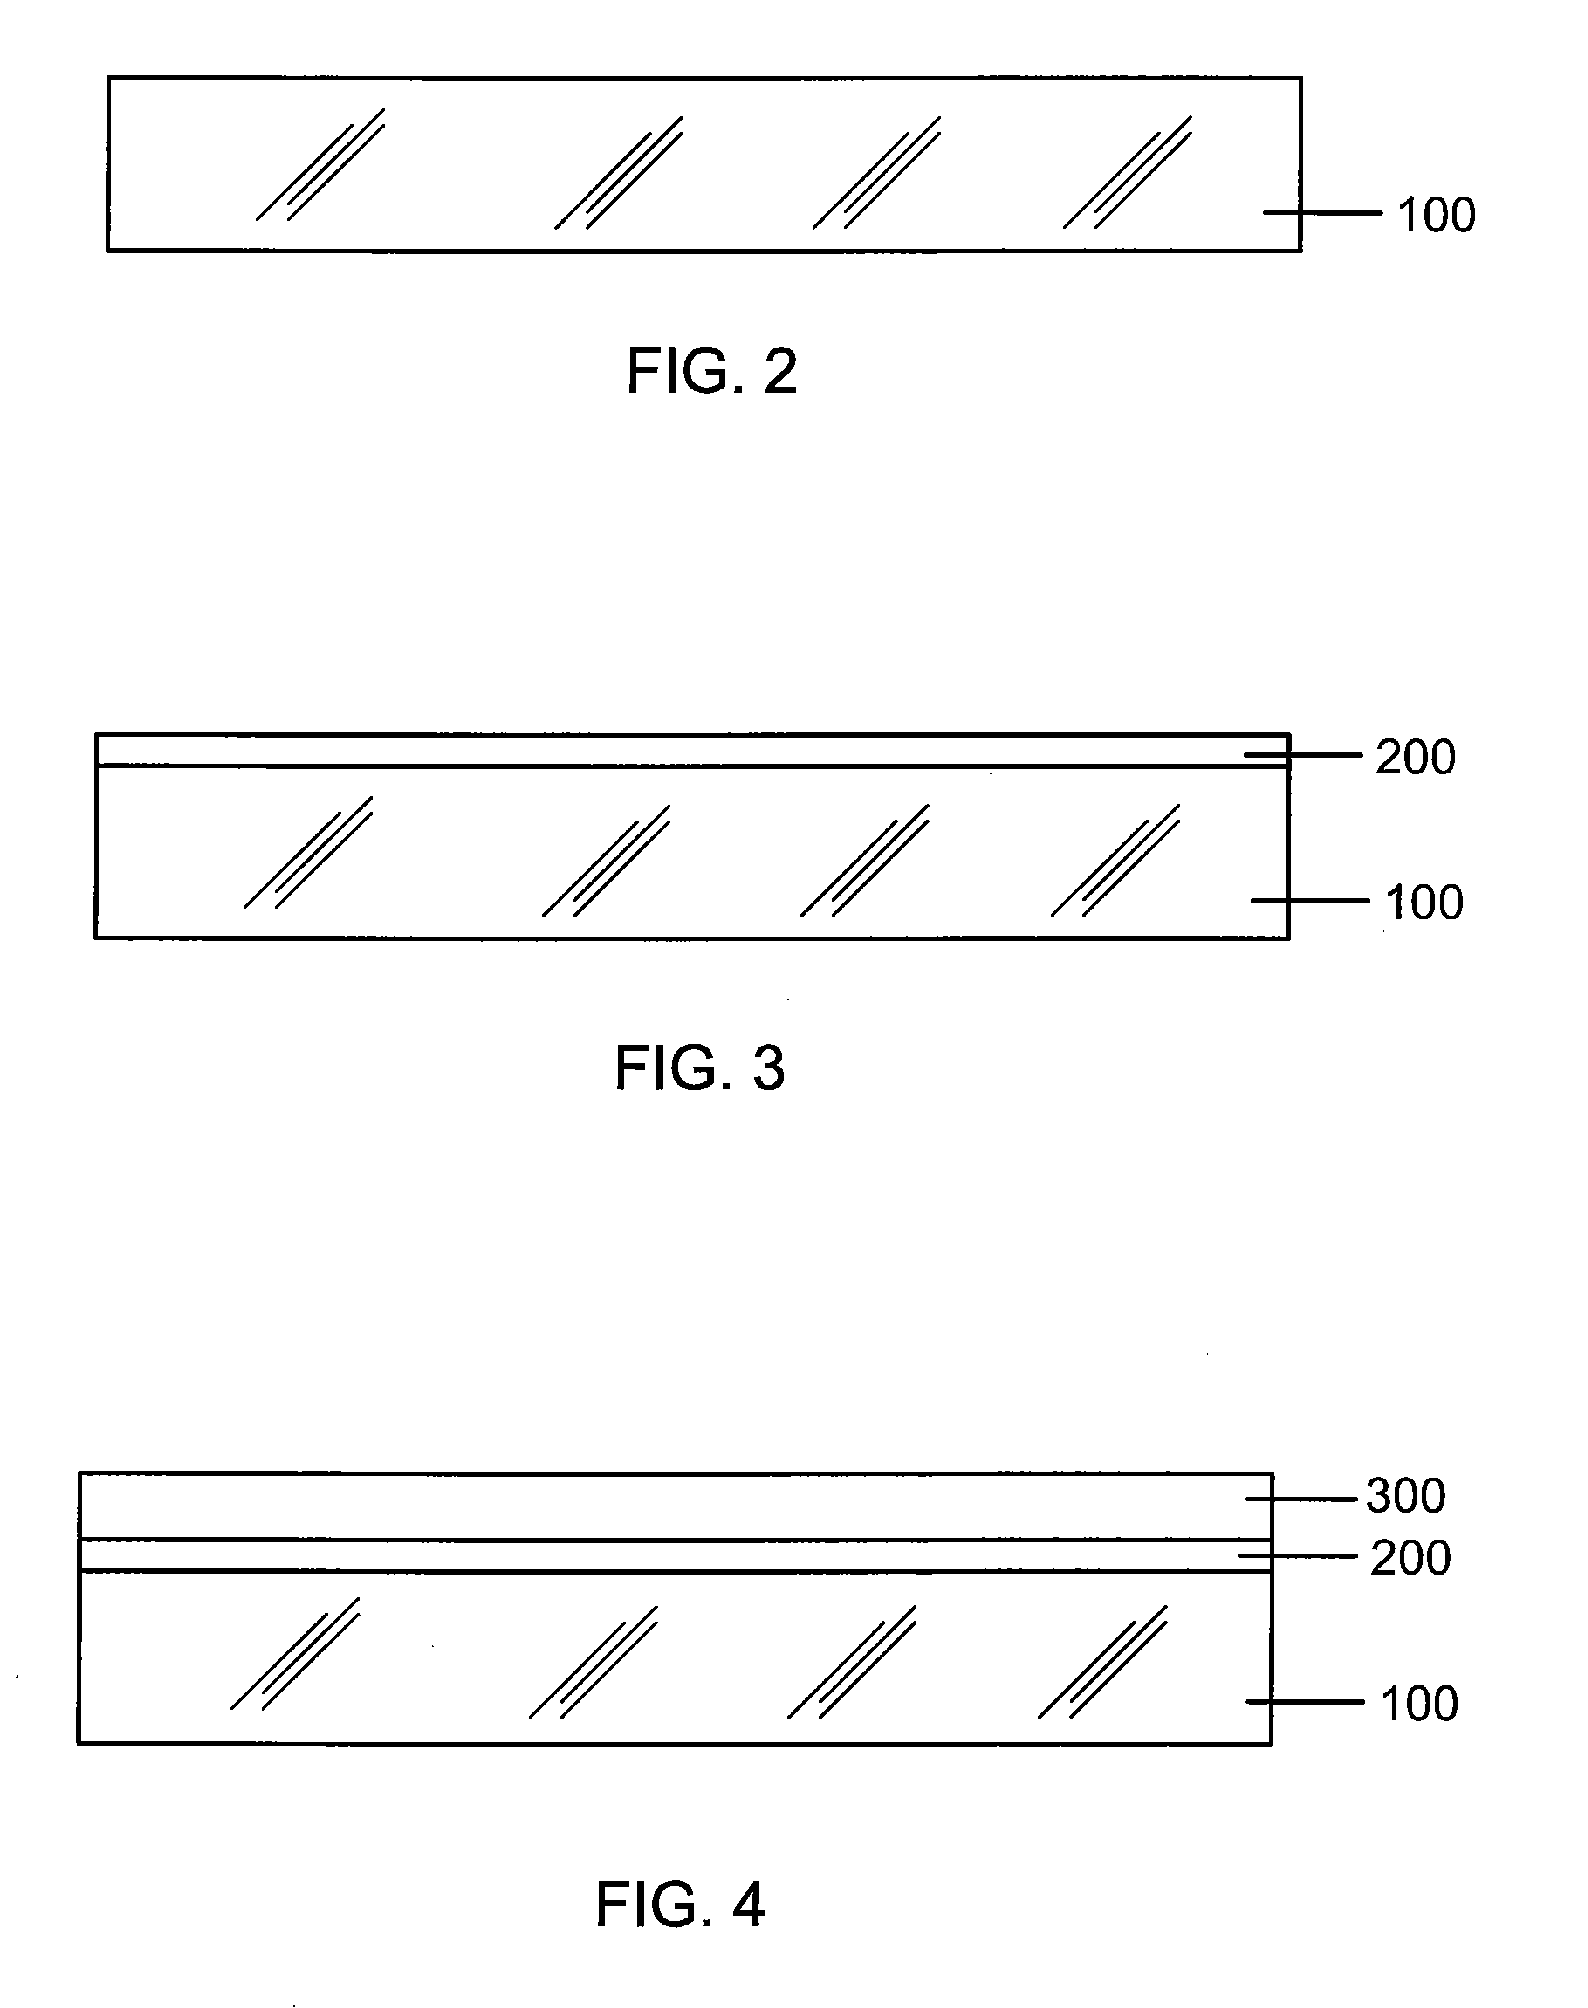 Sodium doping method and system of cigs based materials using large scale batch processing